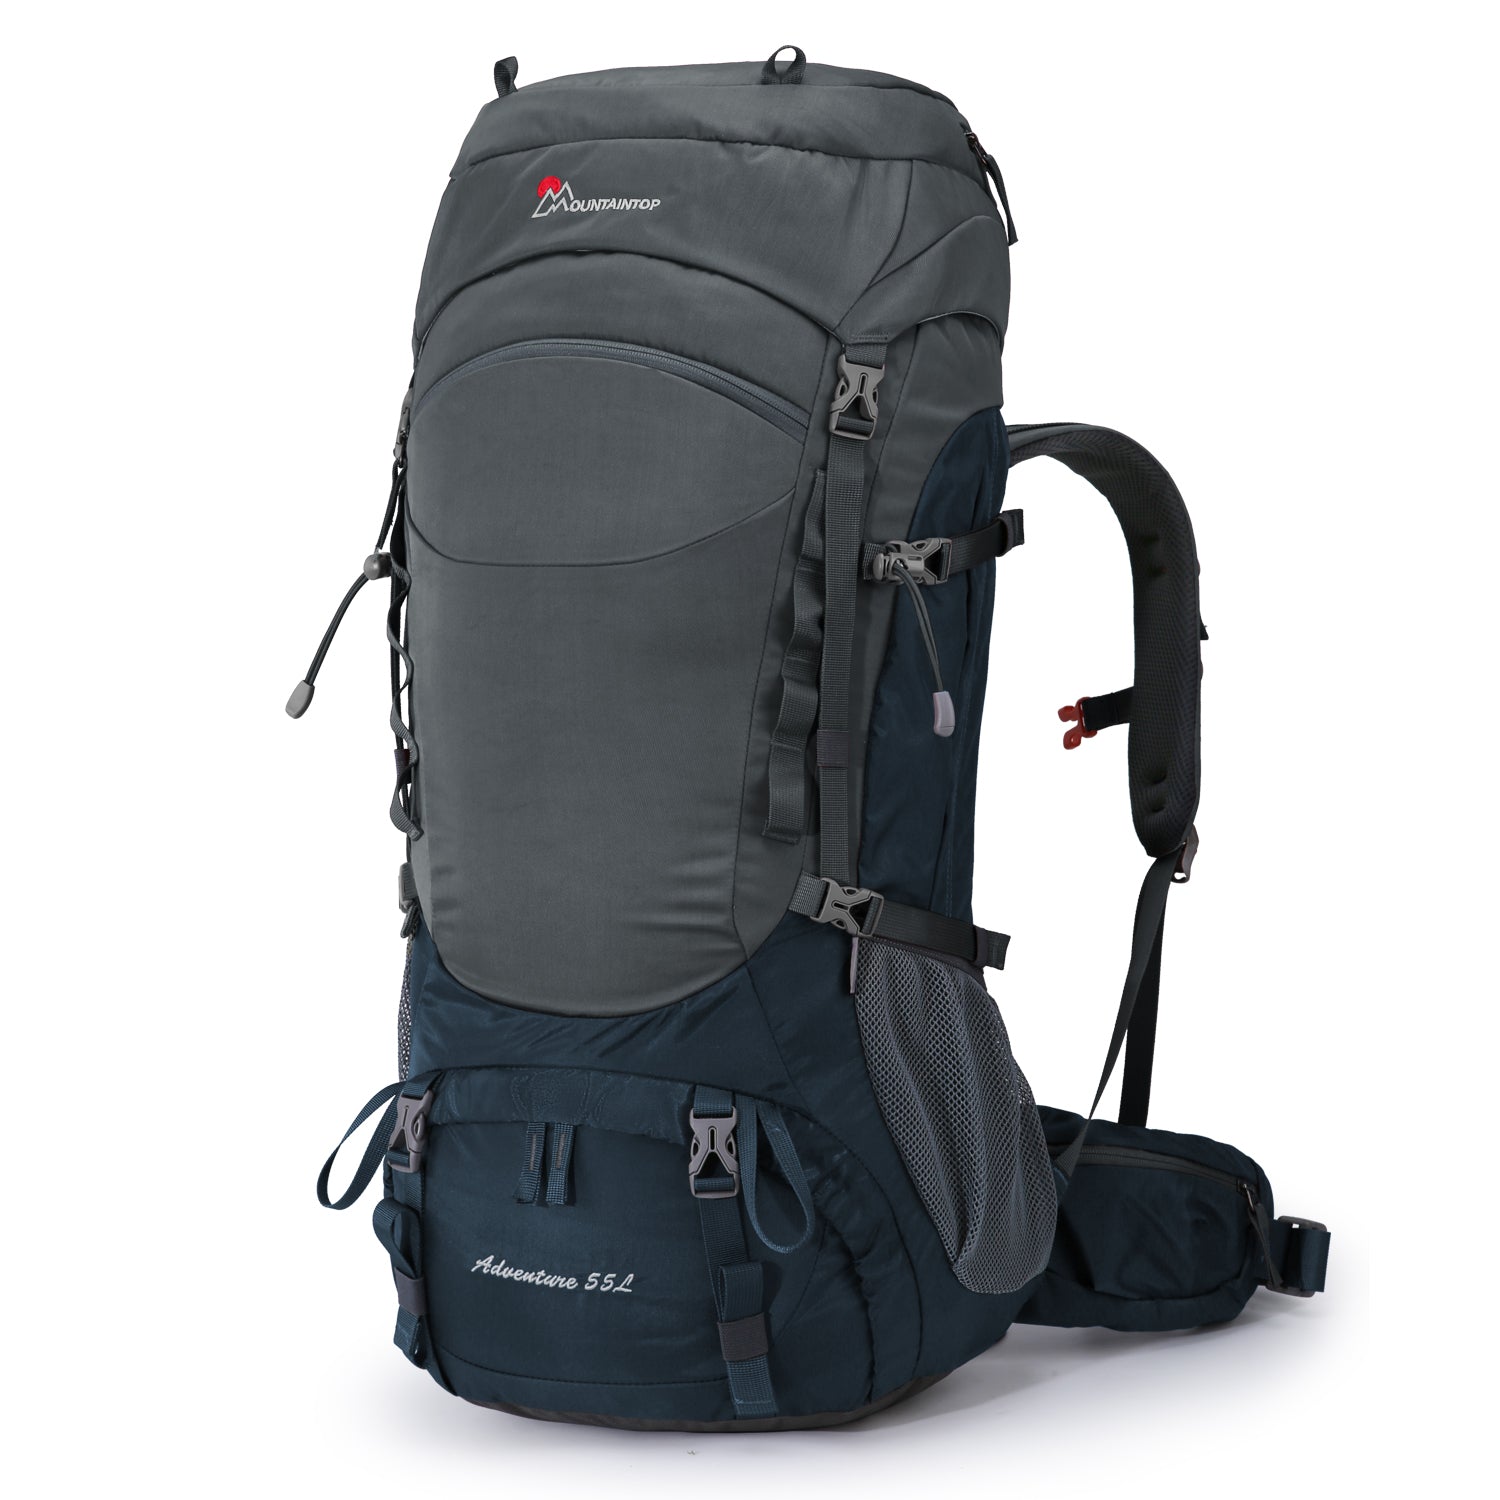 MOUNTAINTOP® 55L Internal Frame Backpack with Rain Cover